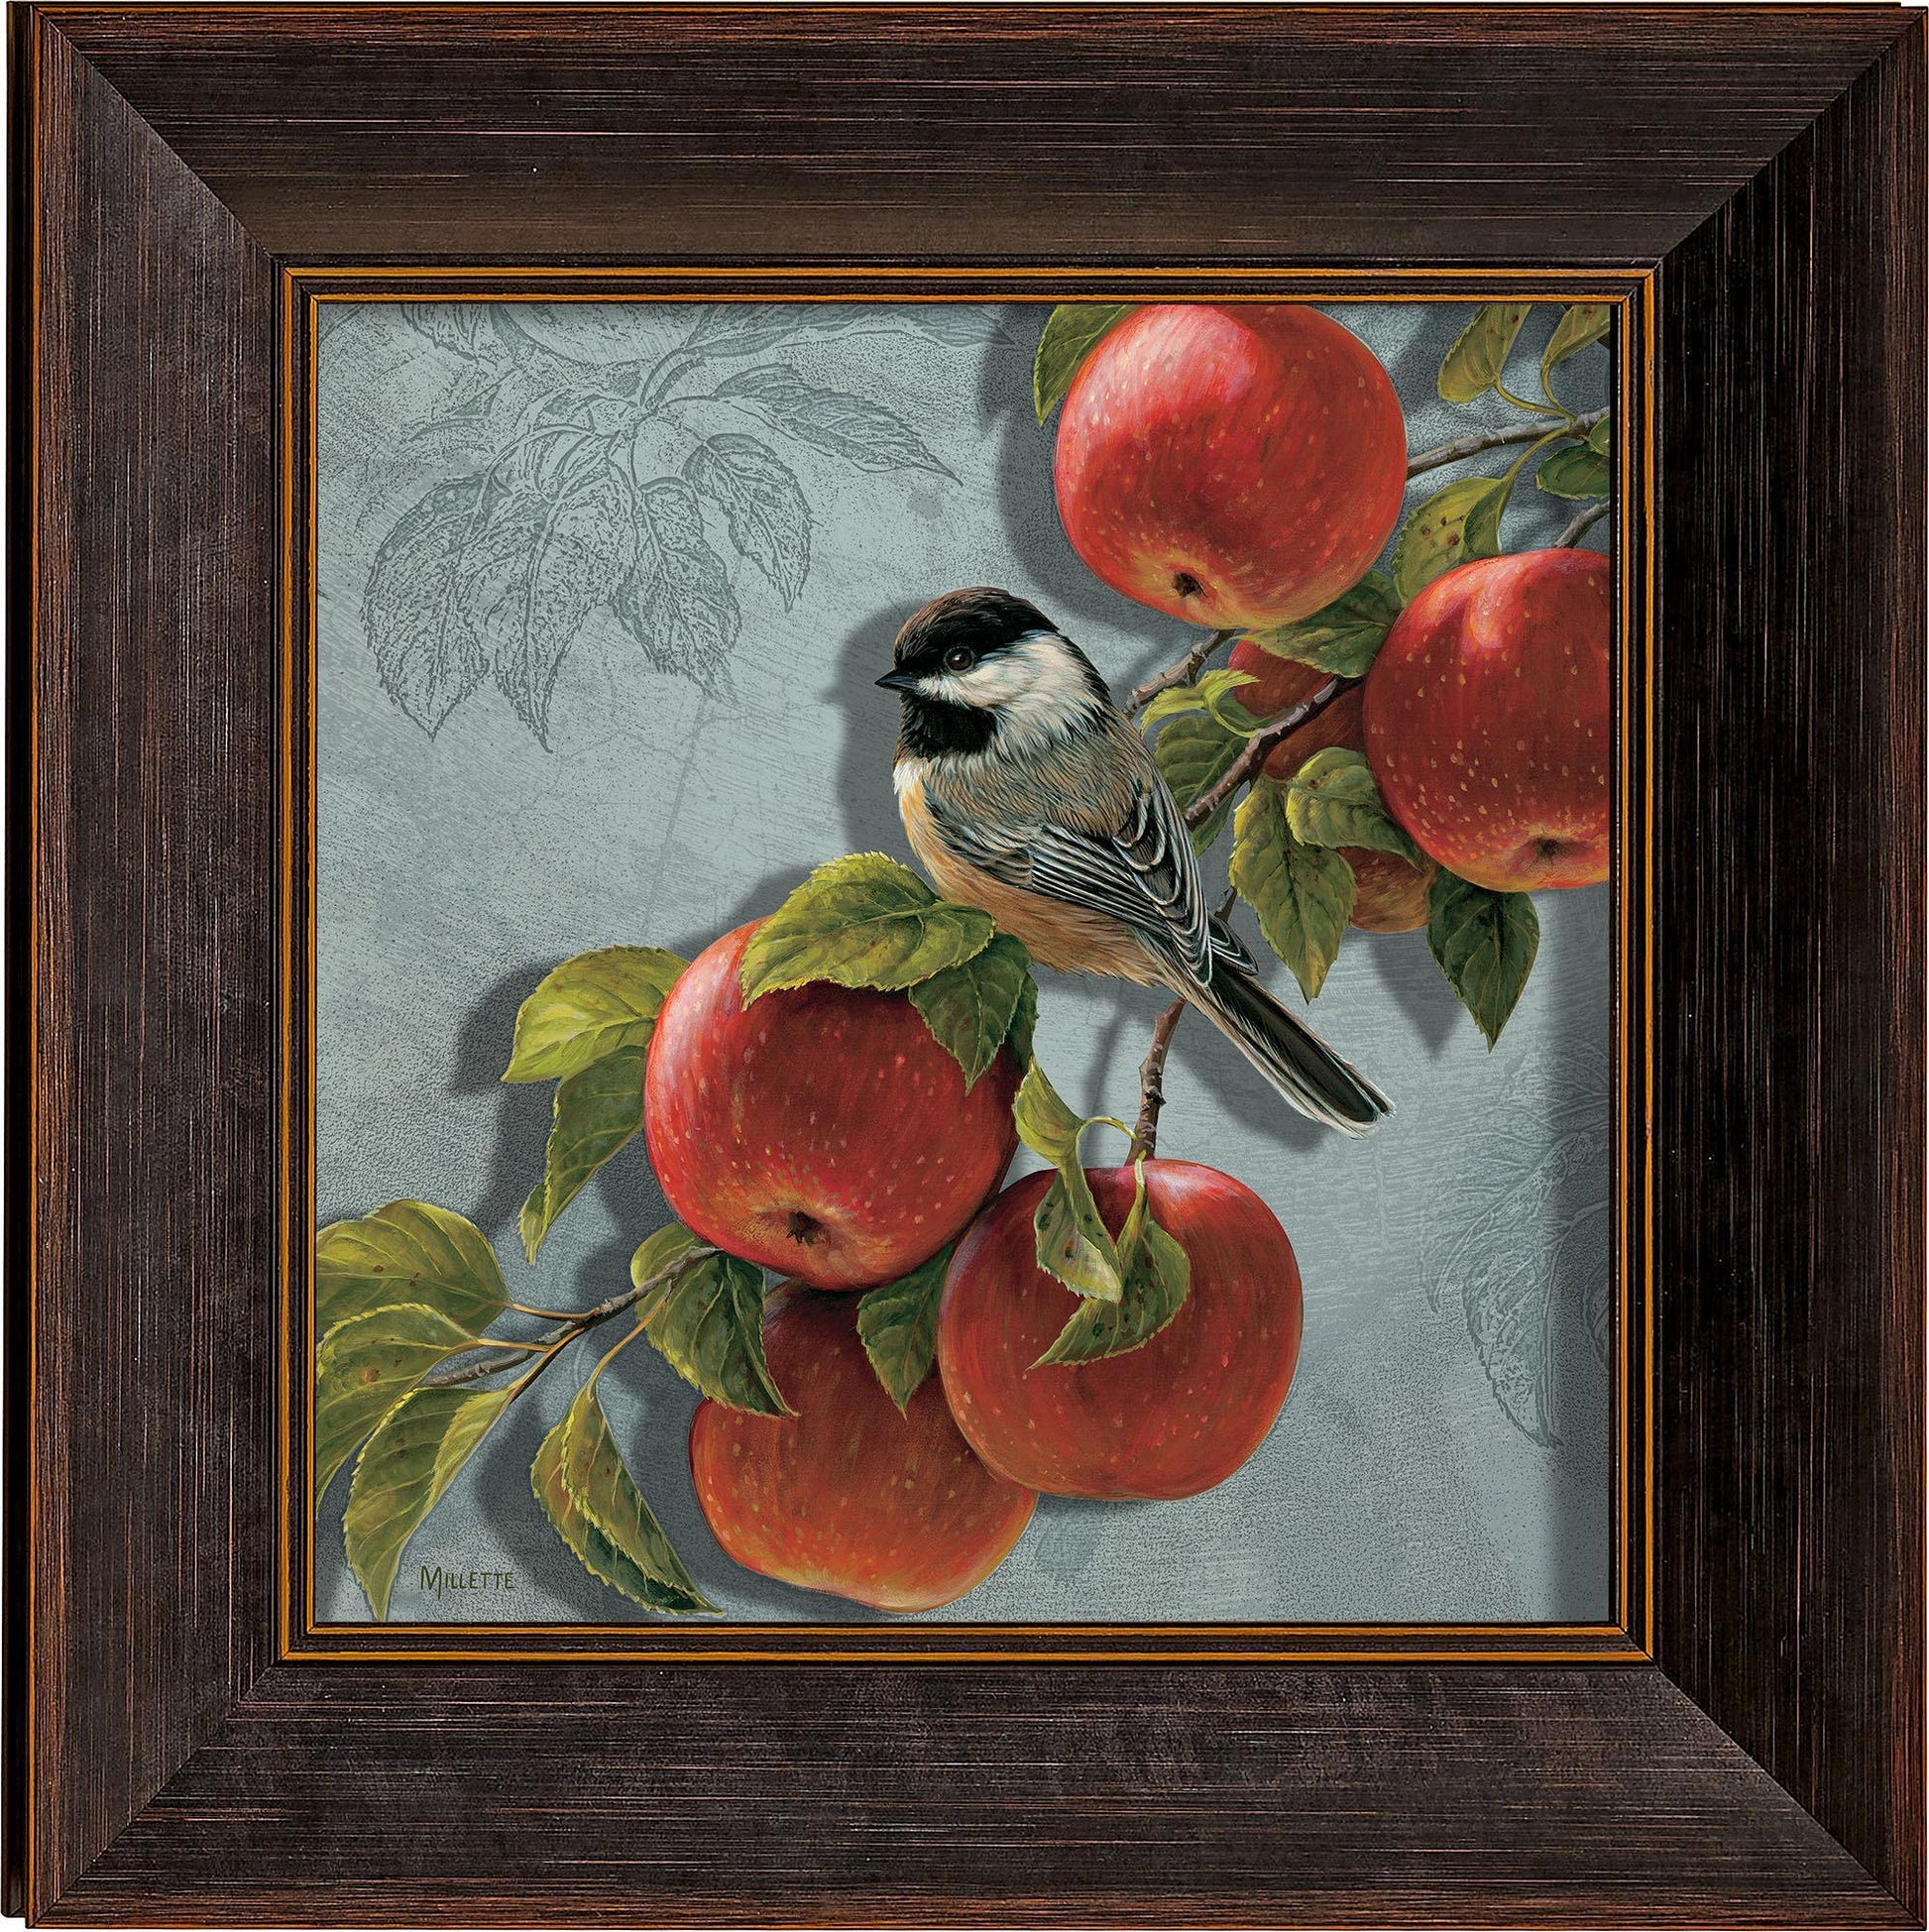 orchard-visitor-chickadee-apples-art-collection-F593587137IG.jpg